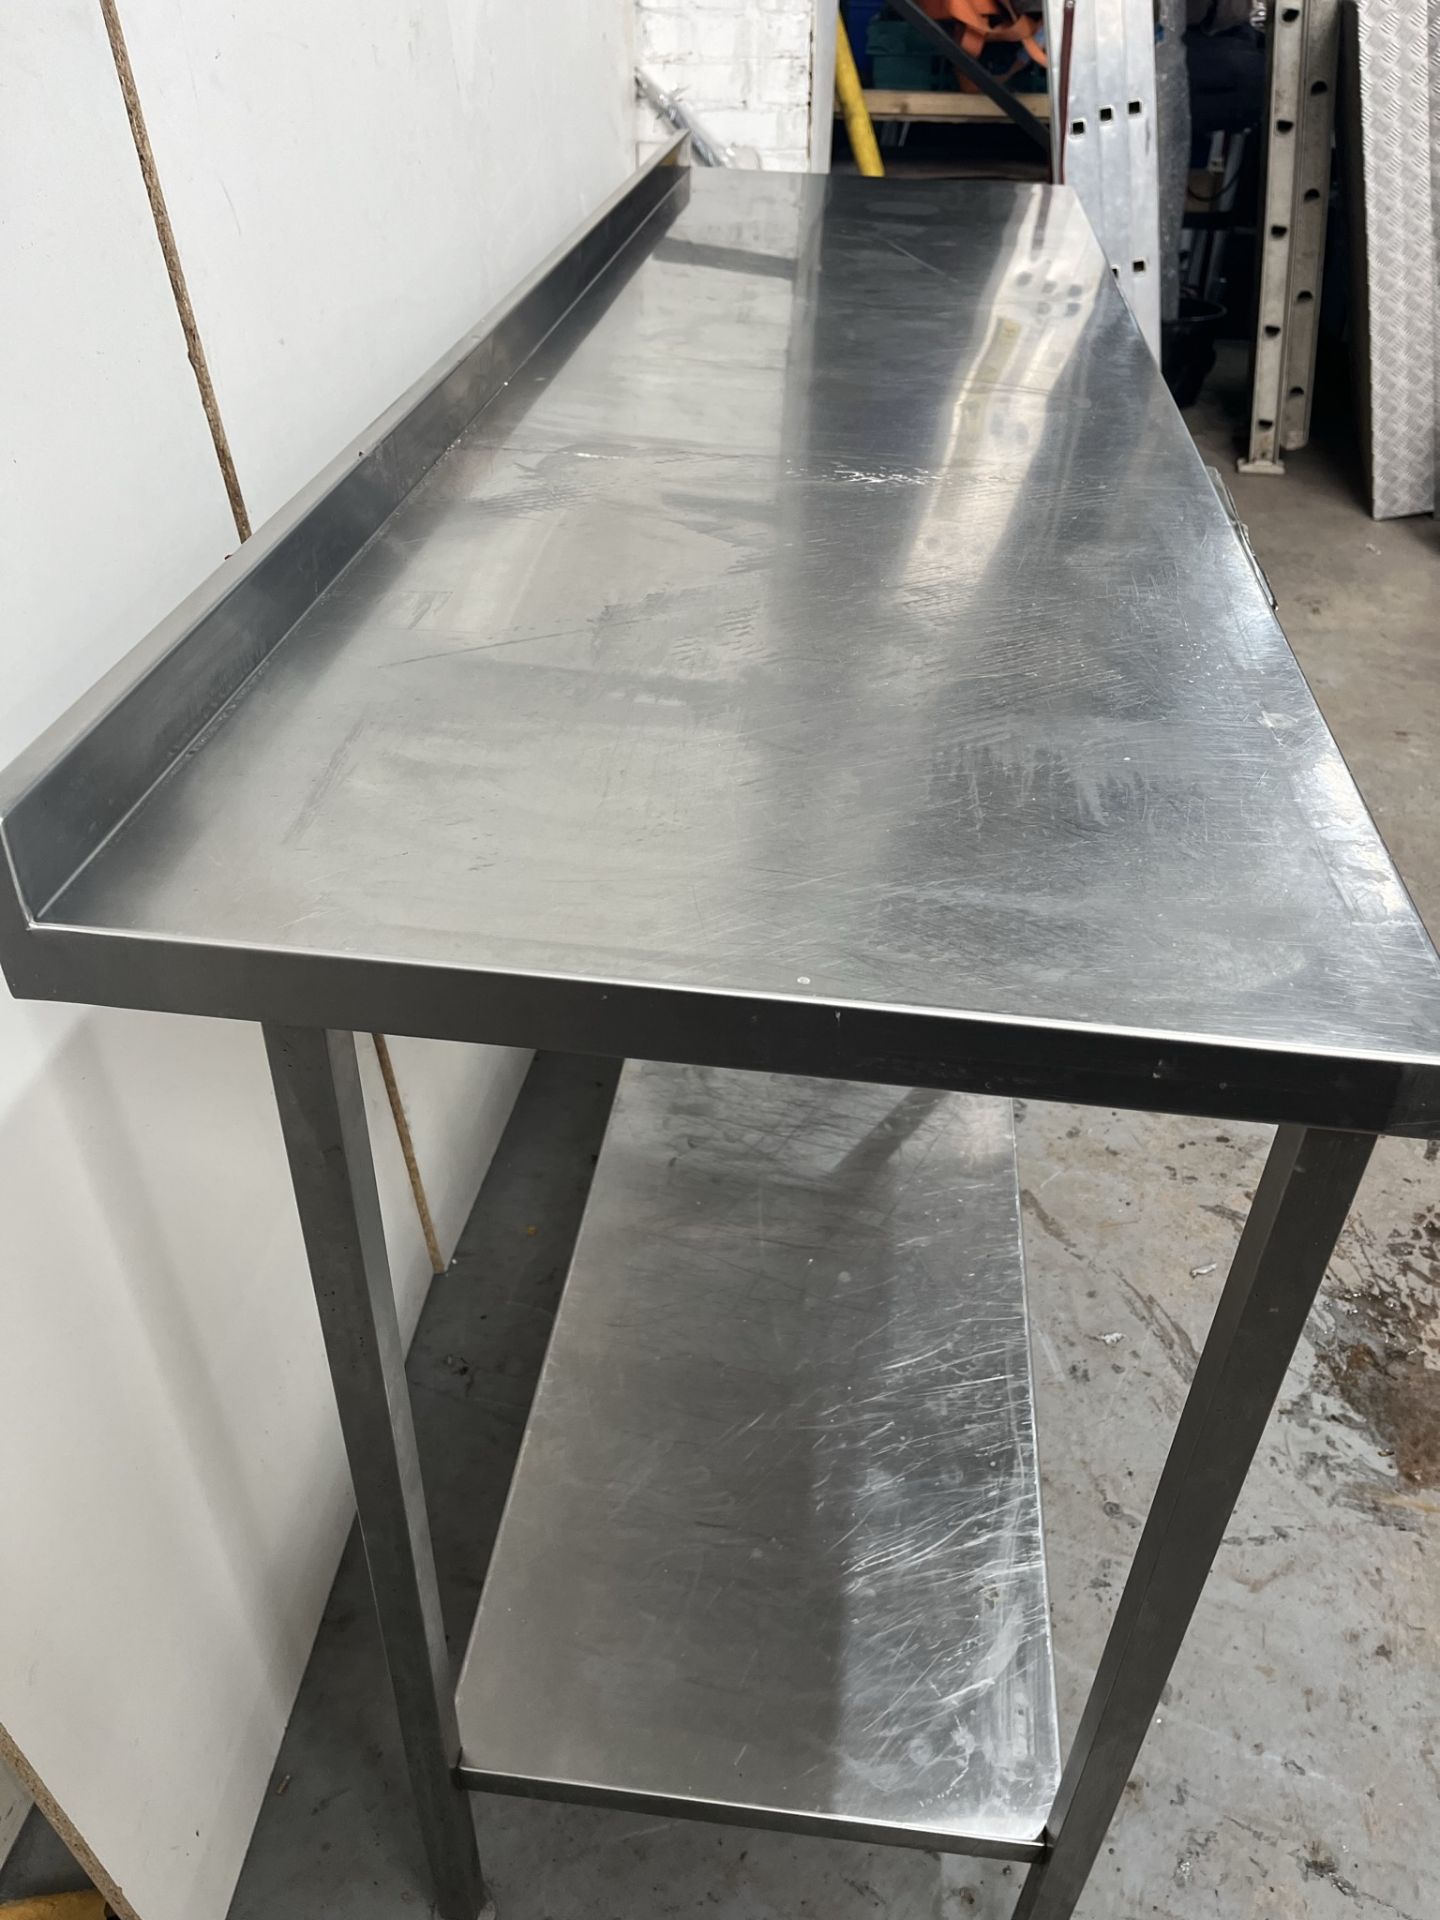 Commercial Stainless Steel Catering Table With Bottom Shelf & Trays - Image 12 of 14